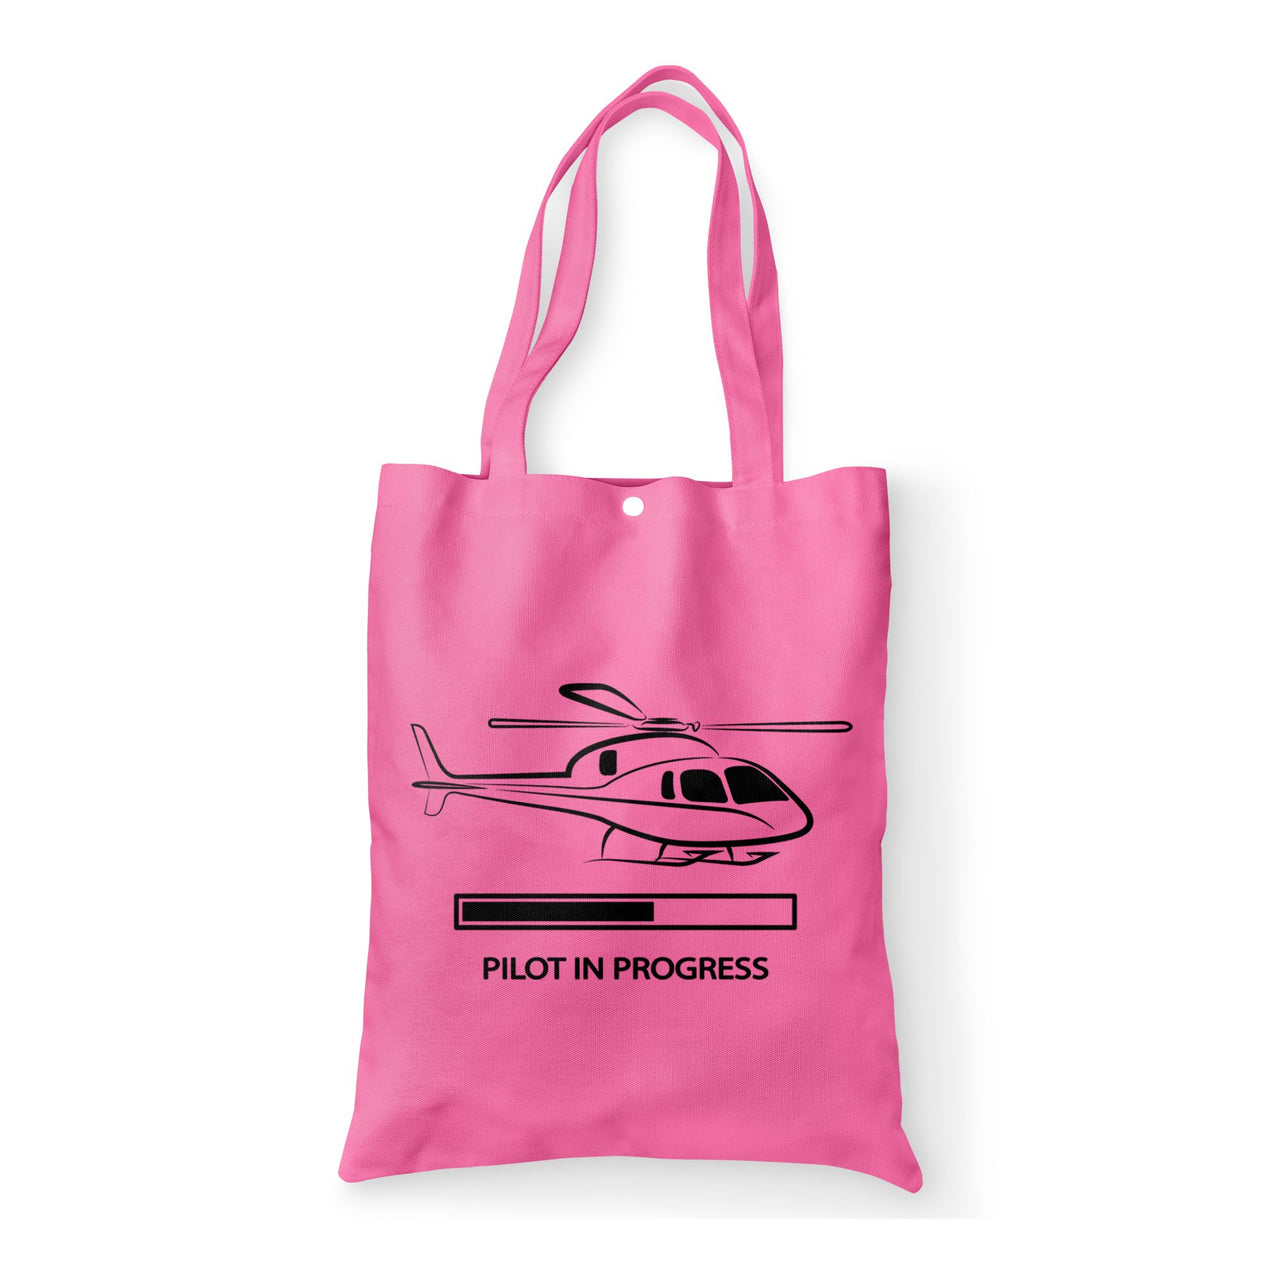 Pilot In Progress (Helicopter) Designed Tote Bags